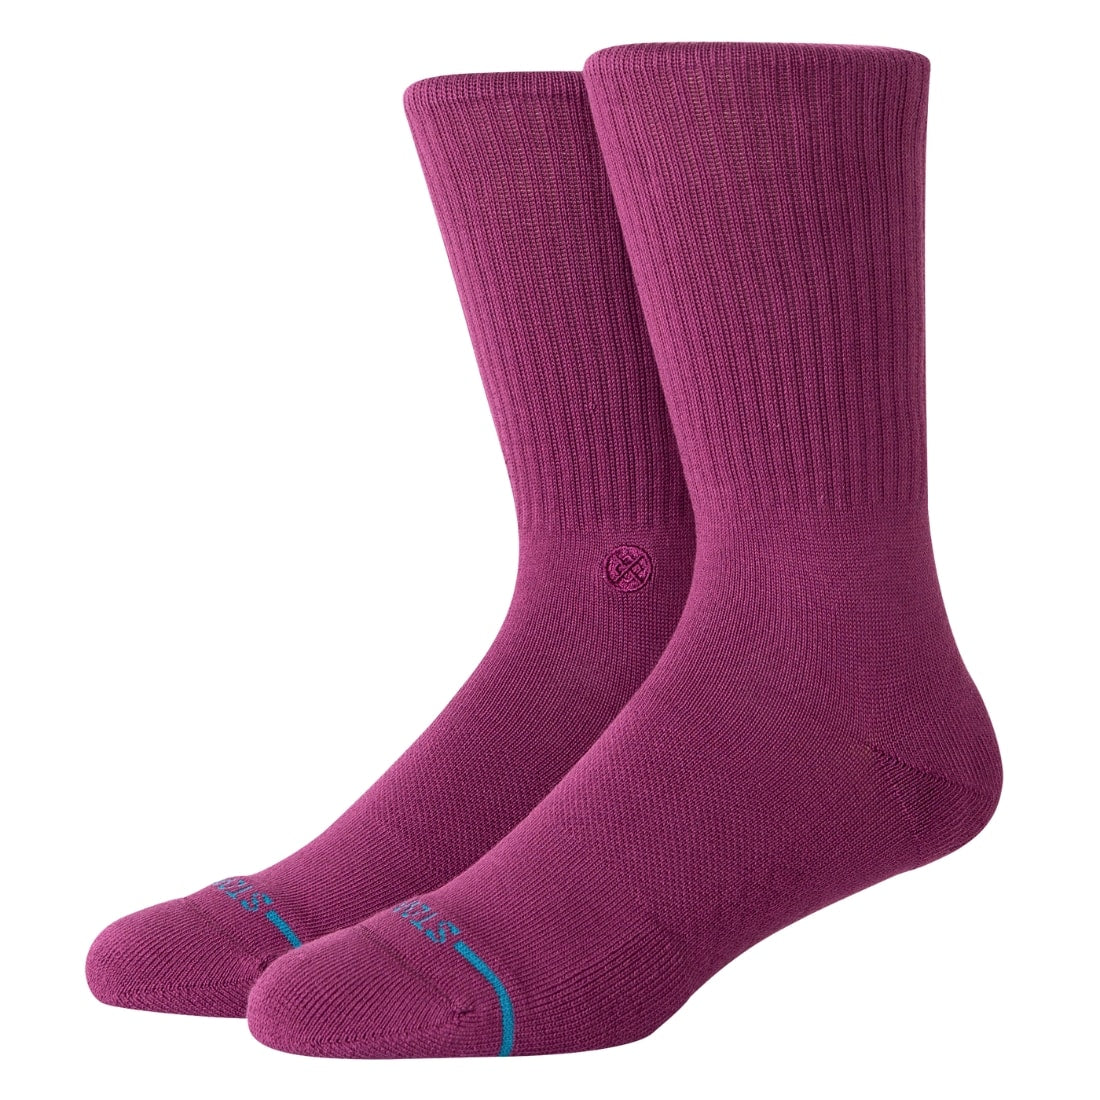 Stance Icon Socks - Berry - Mens Crew Length Socks by Stance